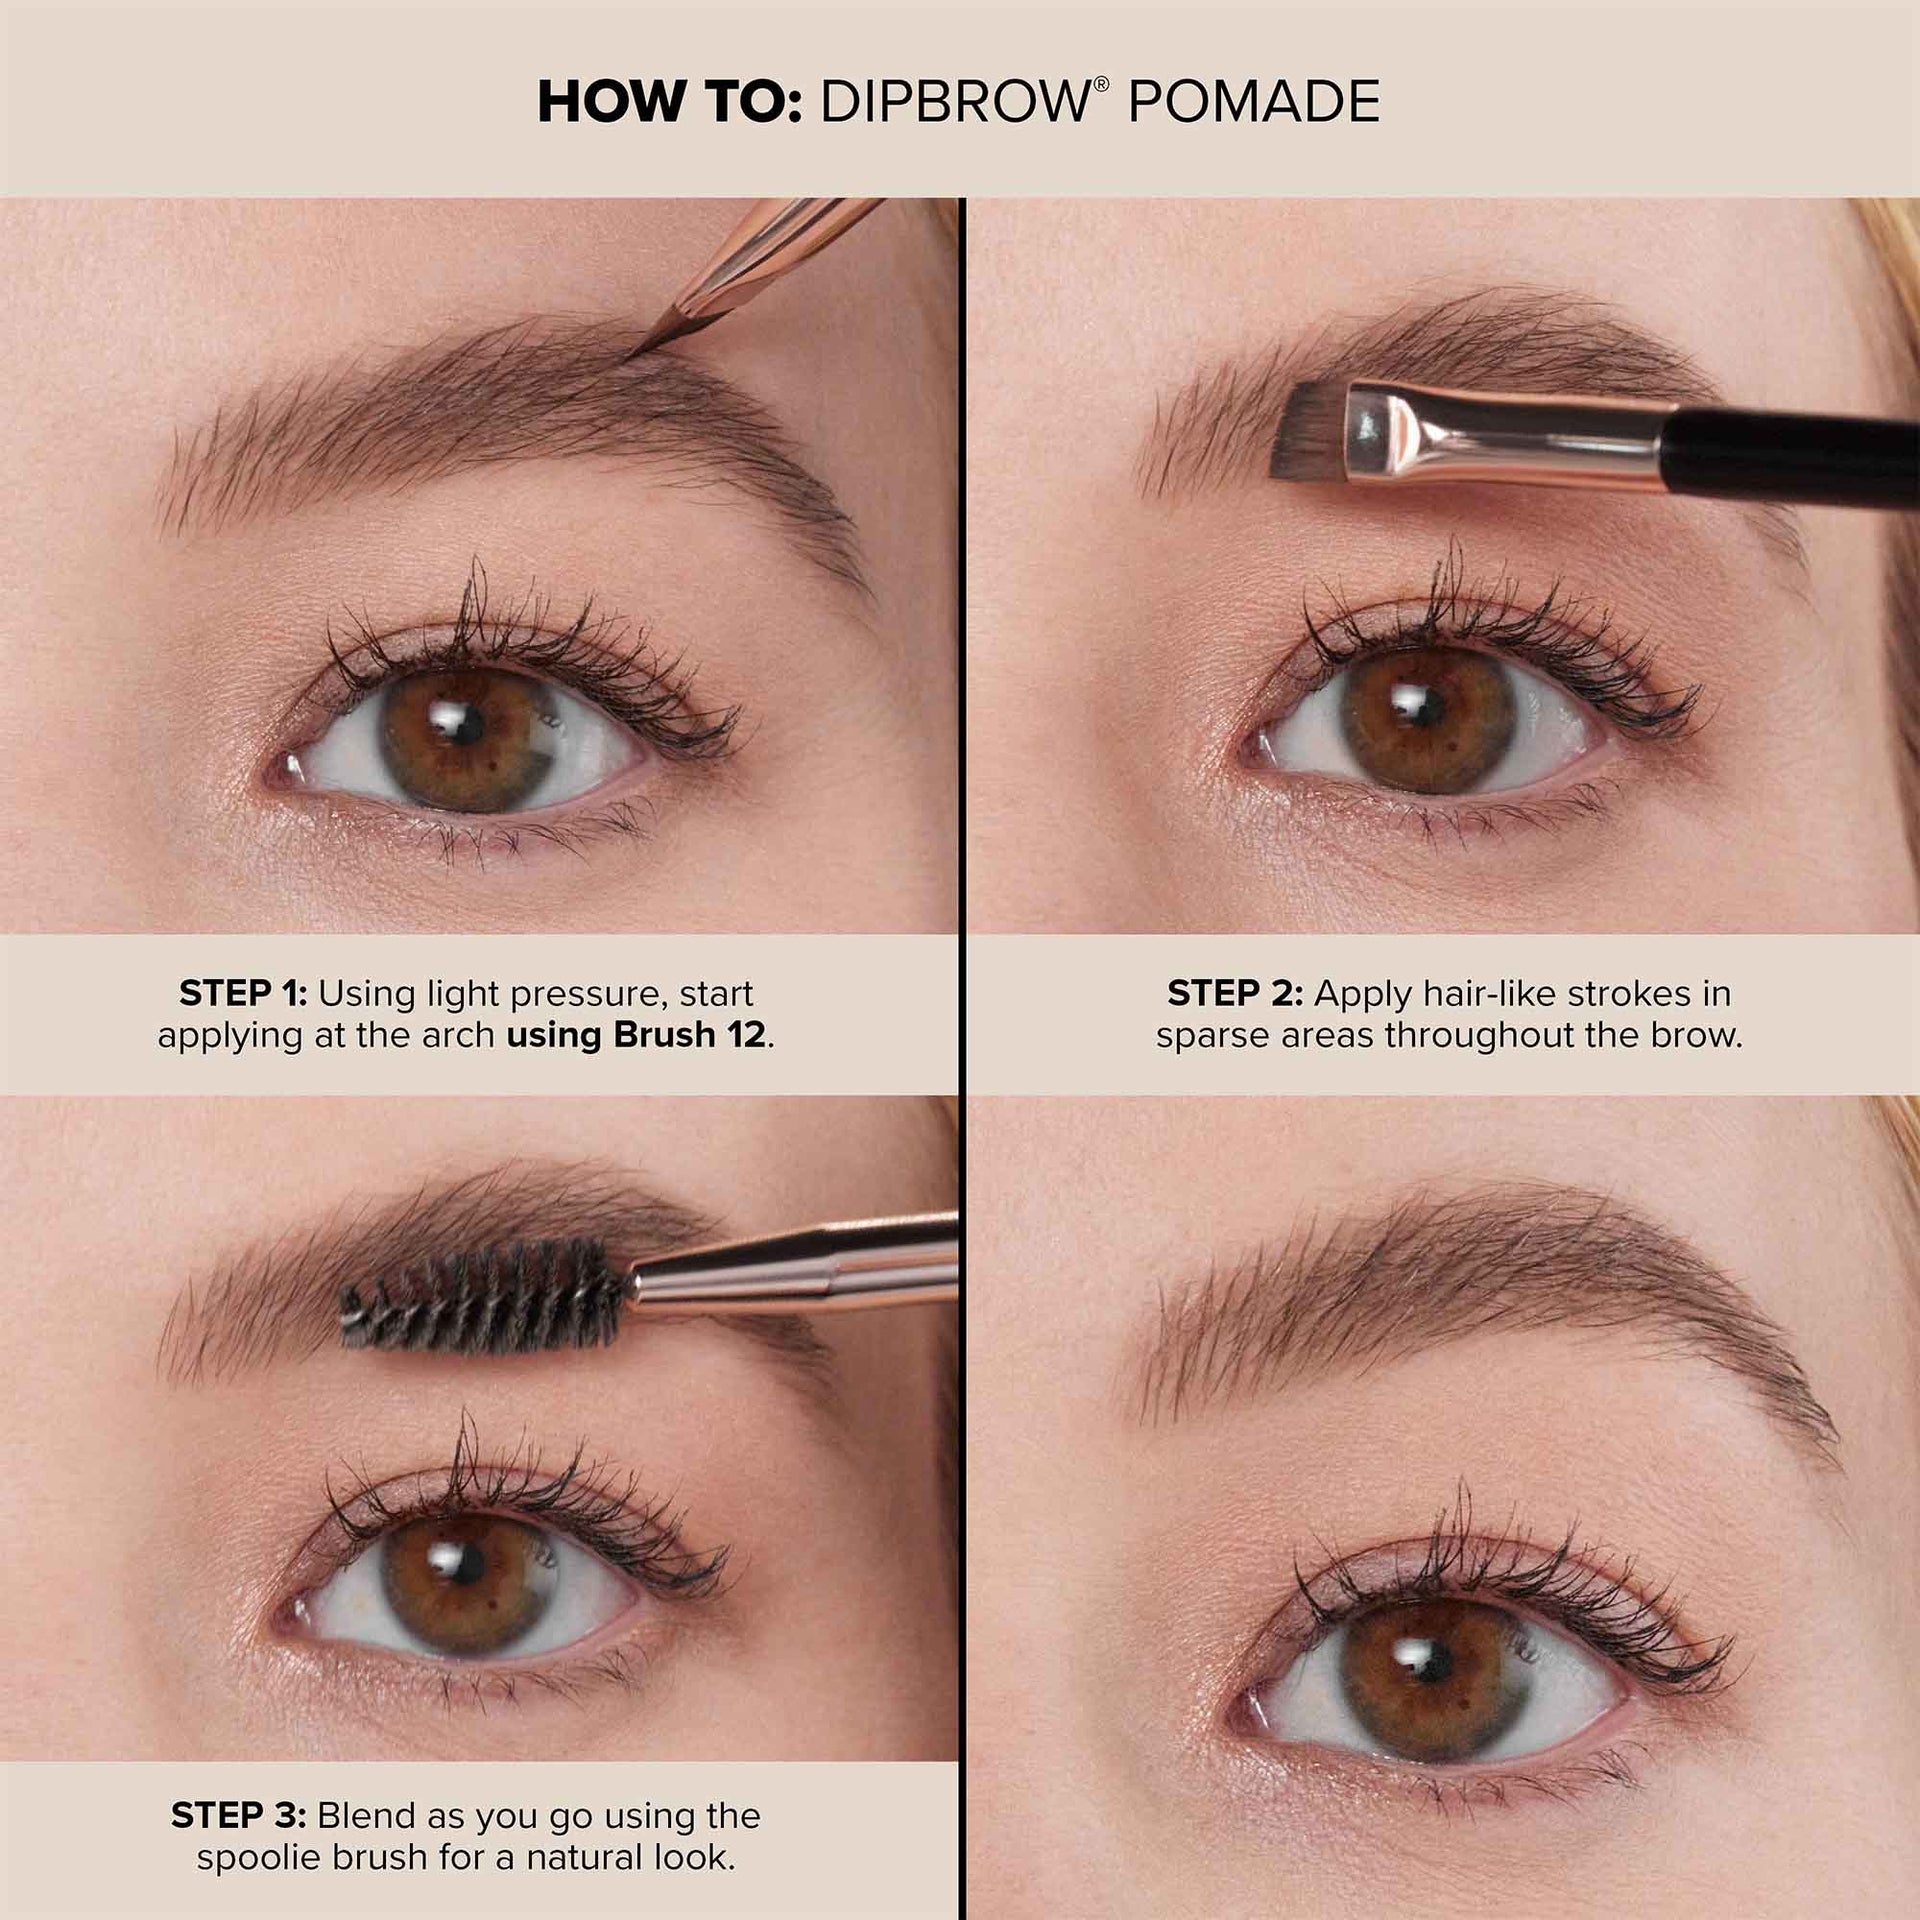 How To Dipbrow® Pomade